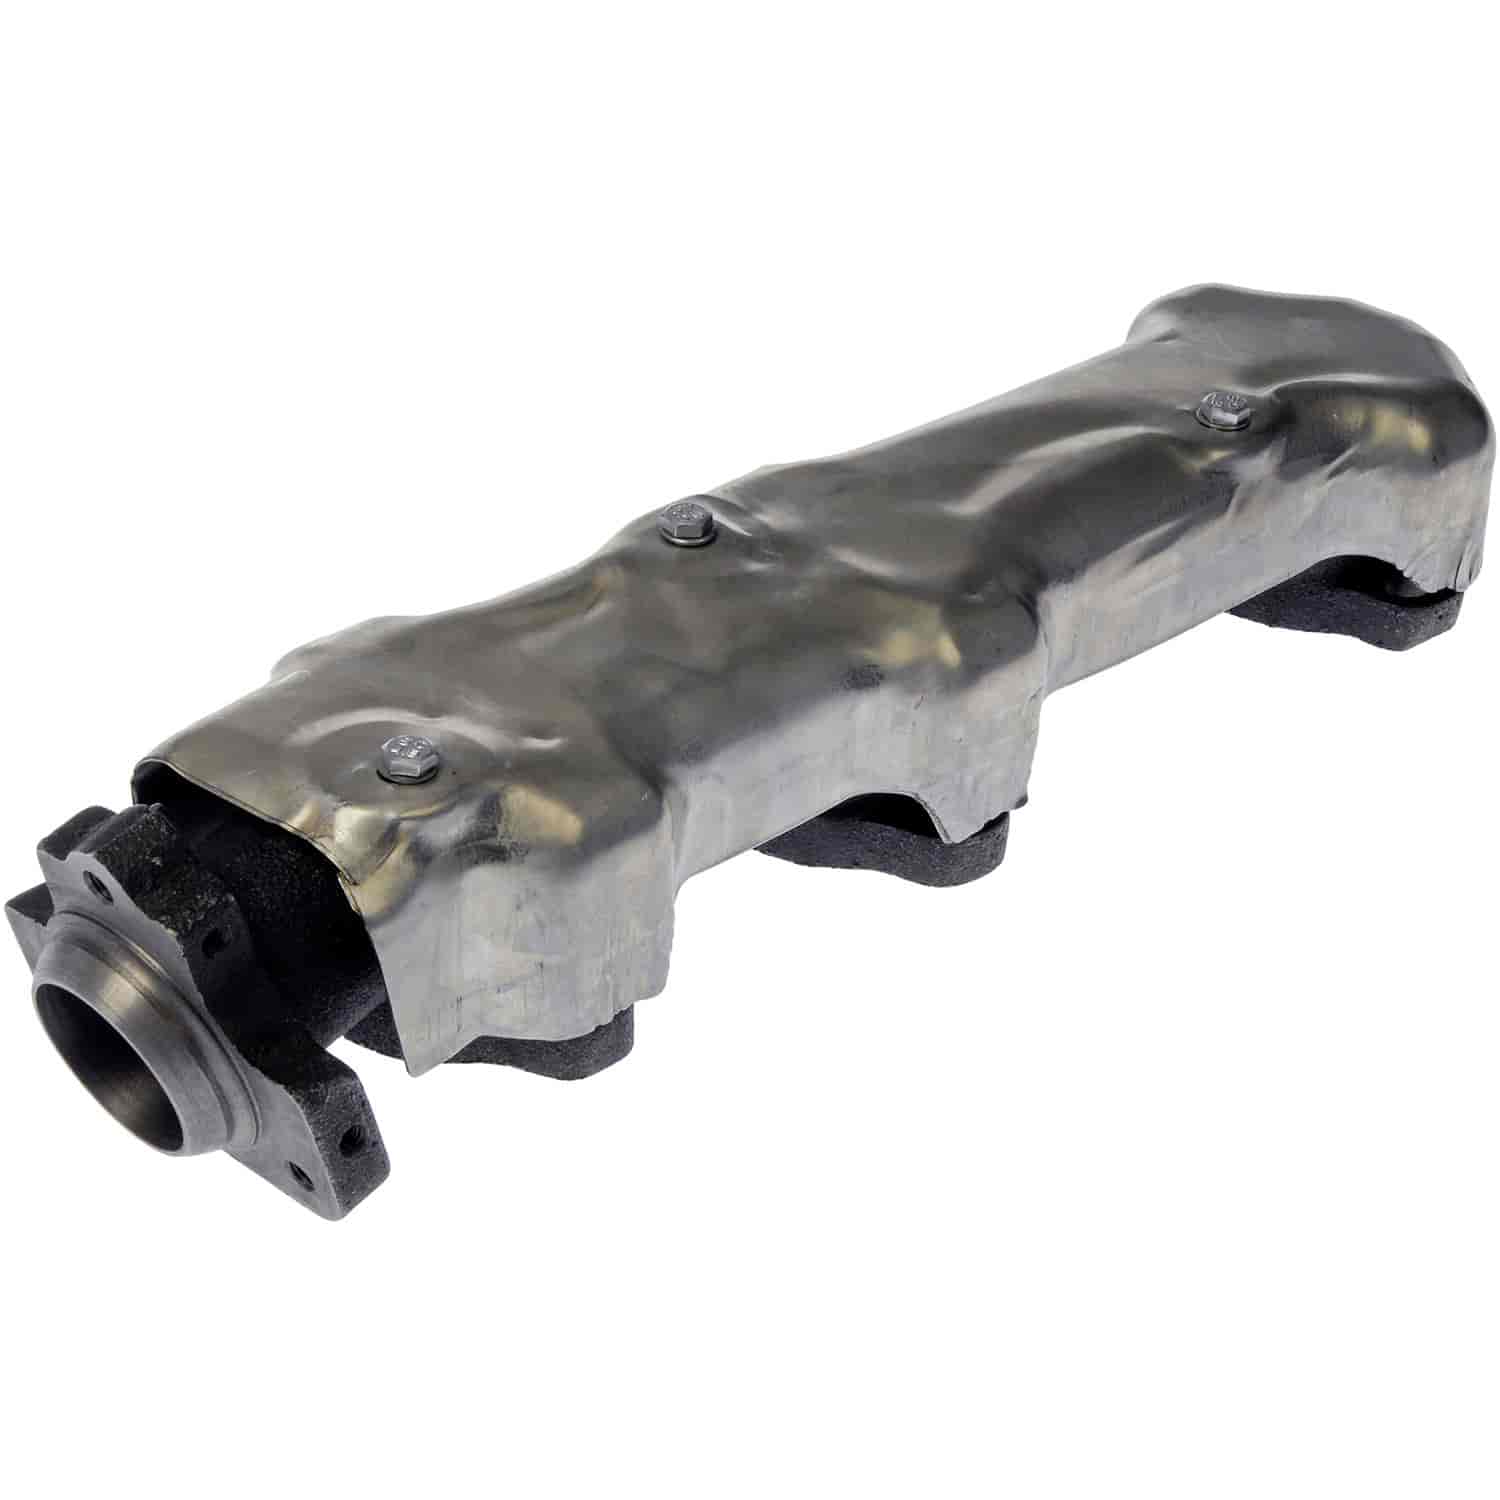 Exhaust Manifold Kit - Includes Required Hardware and Gaskets